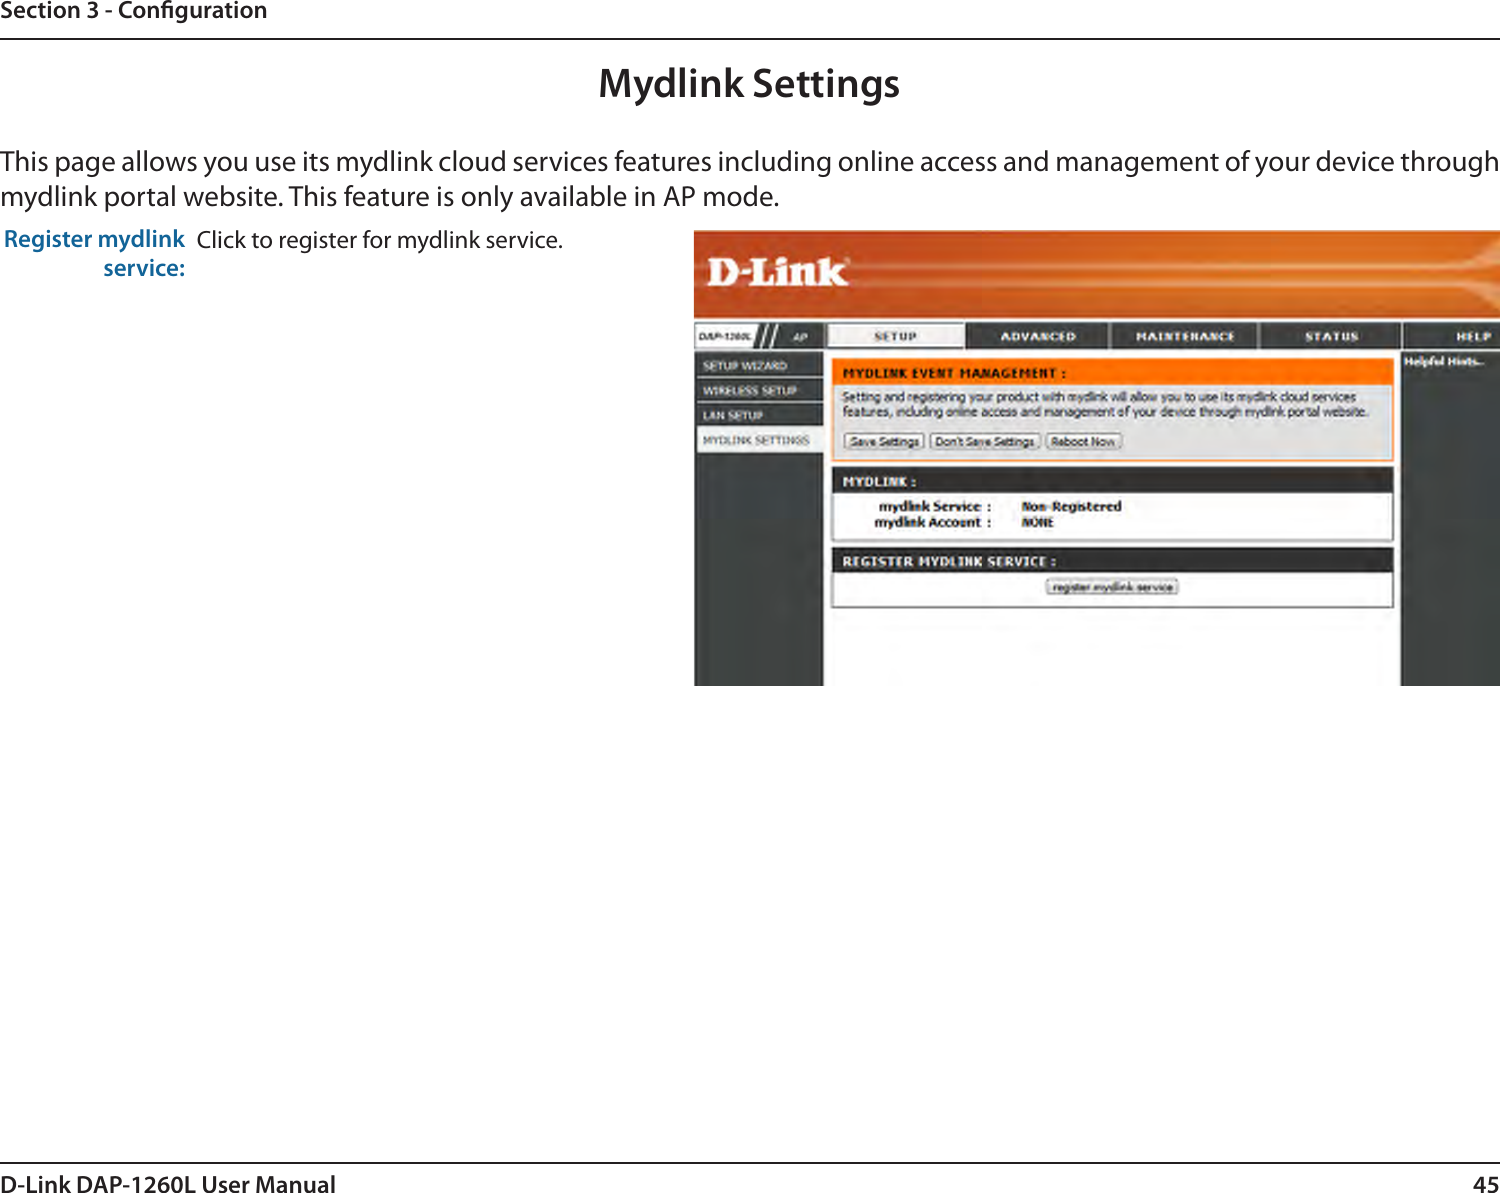 45D-Link DAP-1260L User ManualSection 3 - CongurationMydlink SettingsThis page allows you use its mydlink cloud services features including online access and management of your device through mydlink portal website. This feature is only available in AP mode.Register mydlink service:Click to register for mydlink service. 